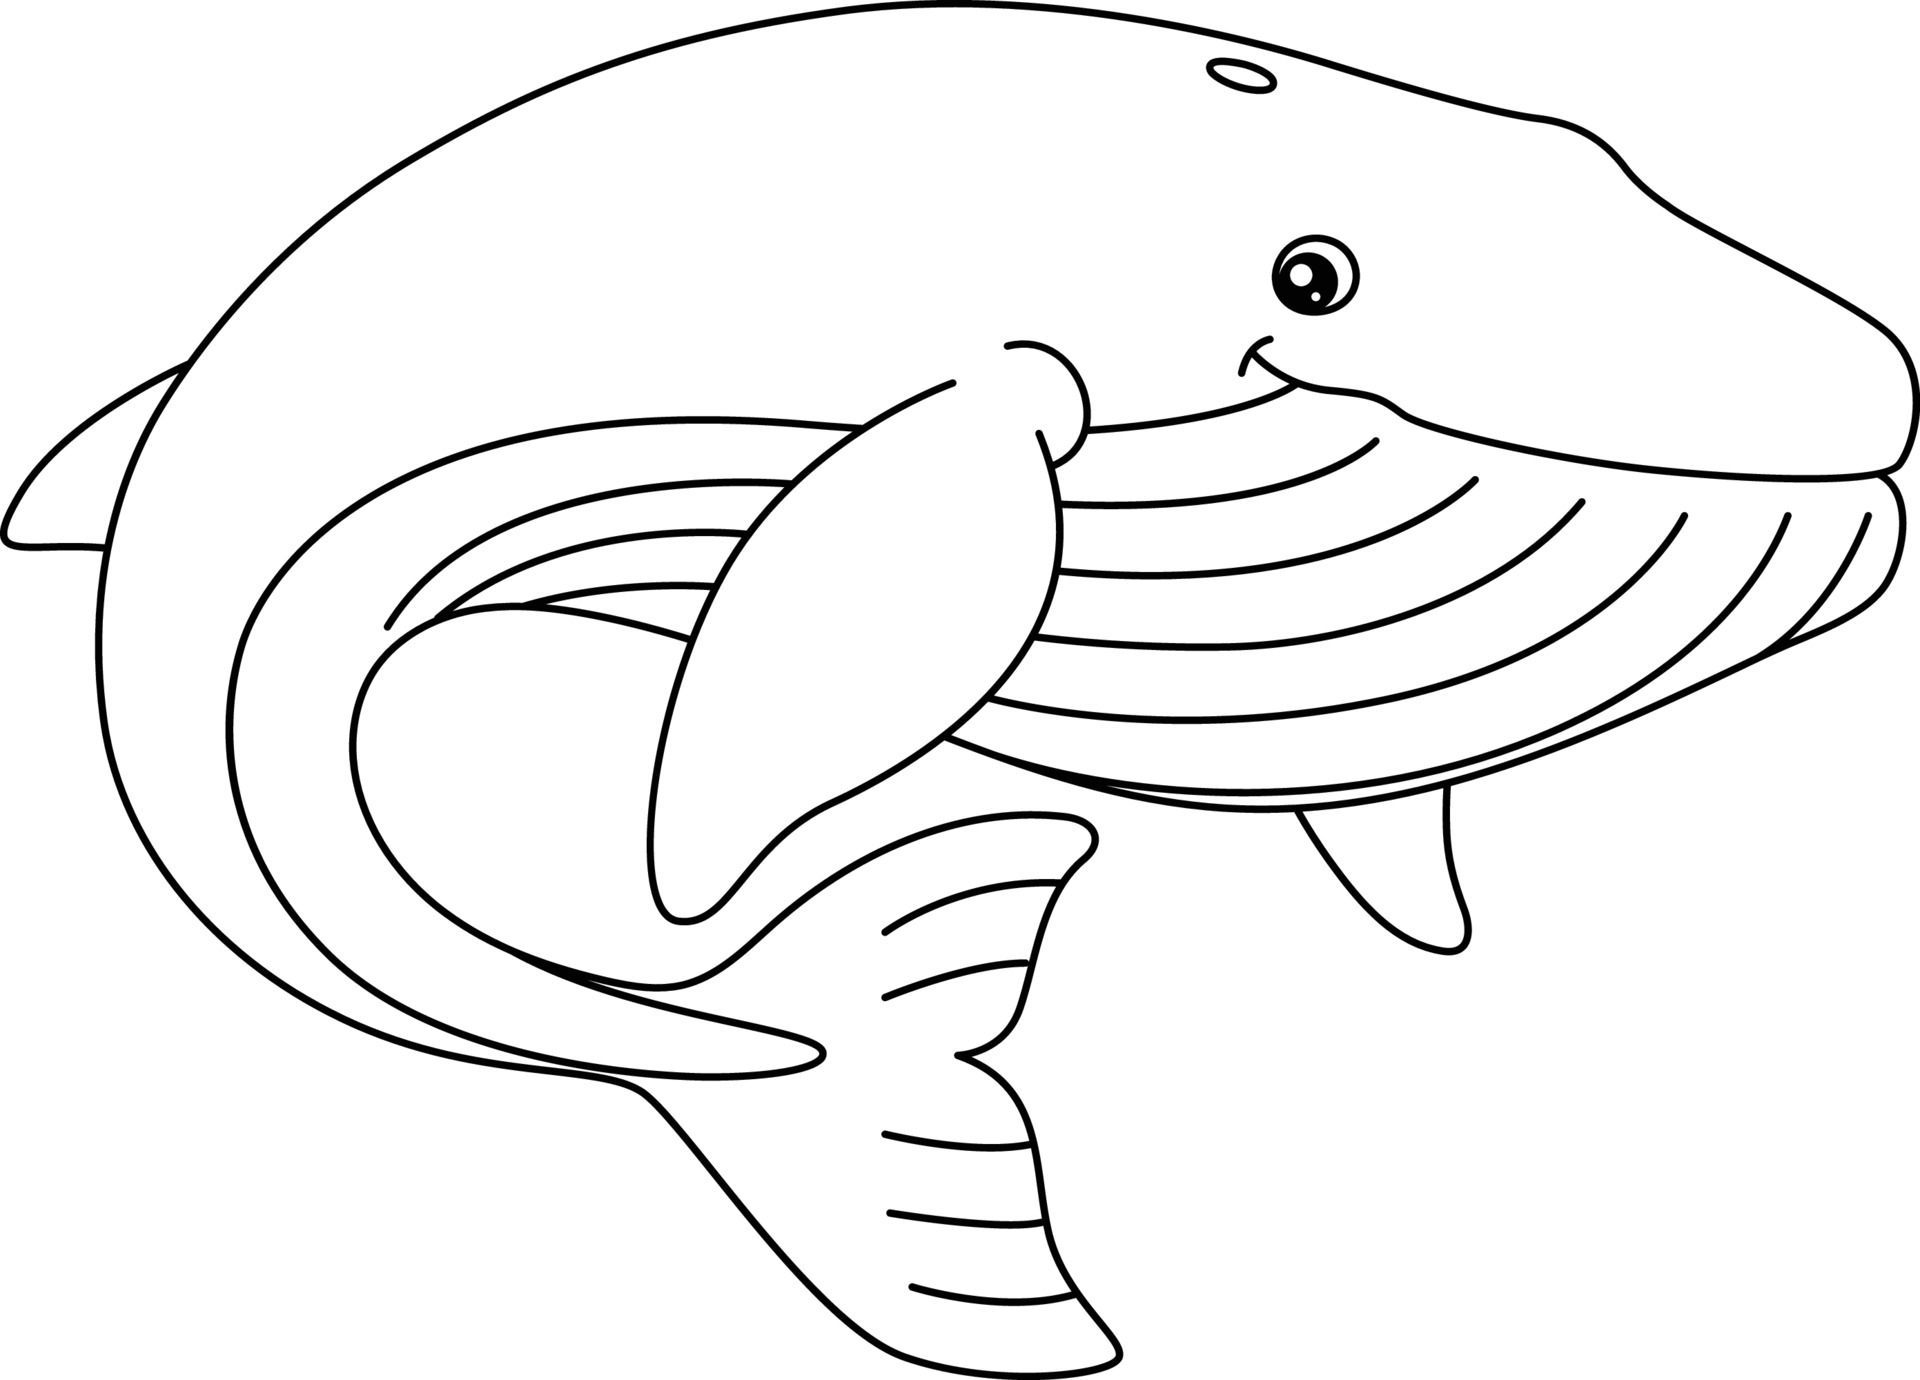 Blue Whale Coloring Page Isolated for Kids 20 Vector Art at ...